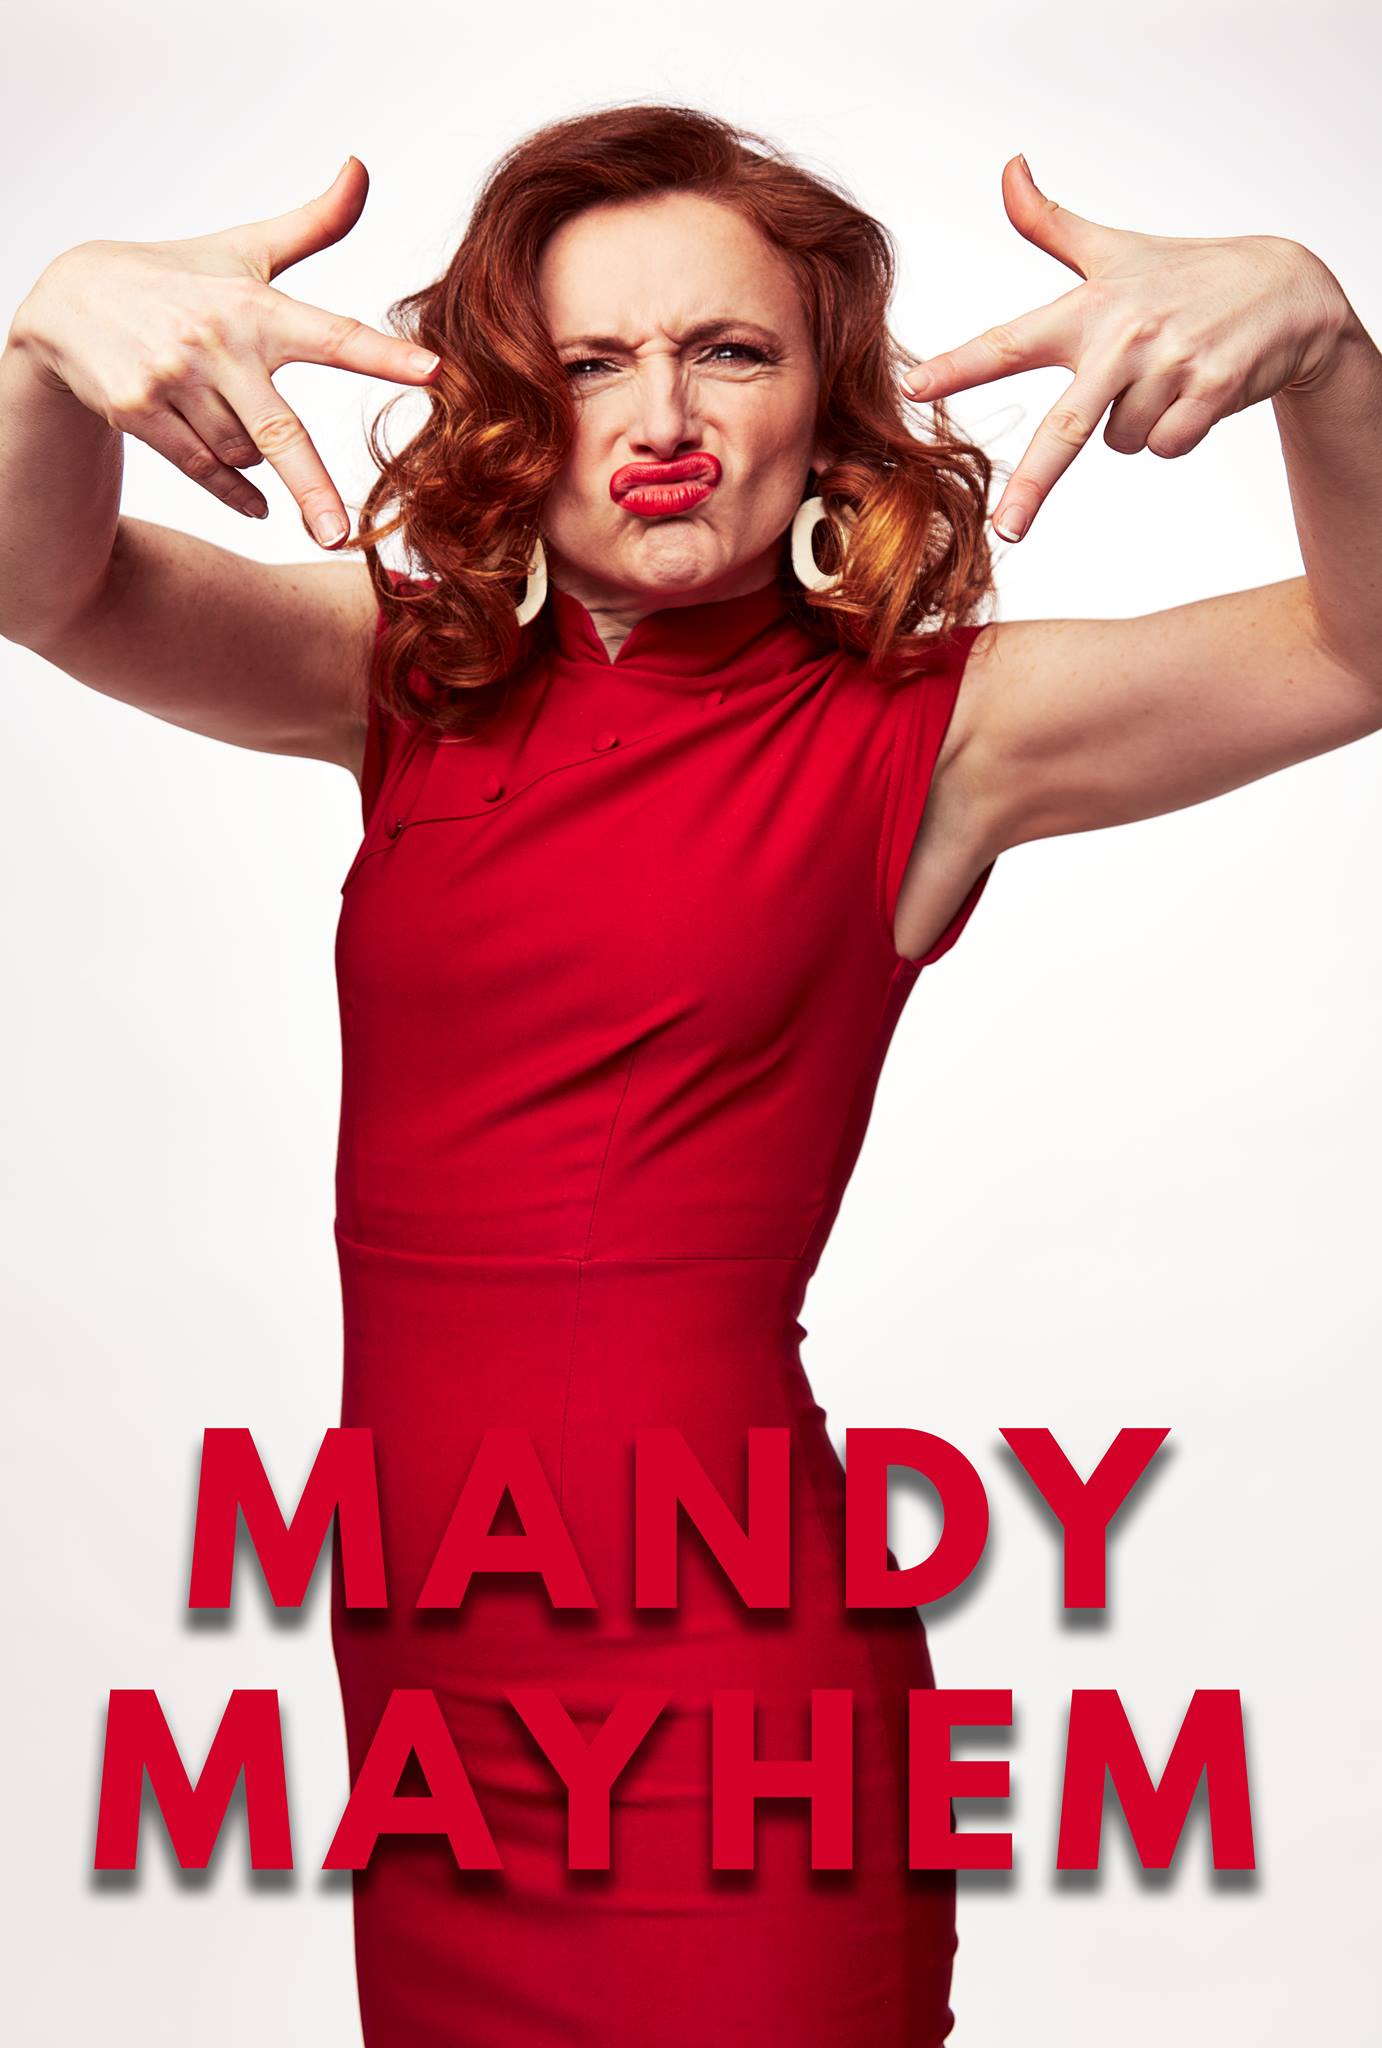 Chatting With Mandy Mayhem Star Of Mutha And Rapping With Actors — Voice Empowerment Your